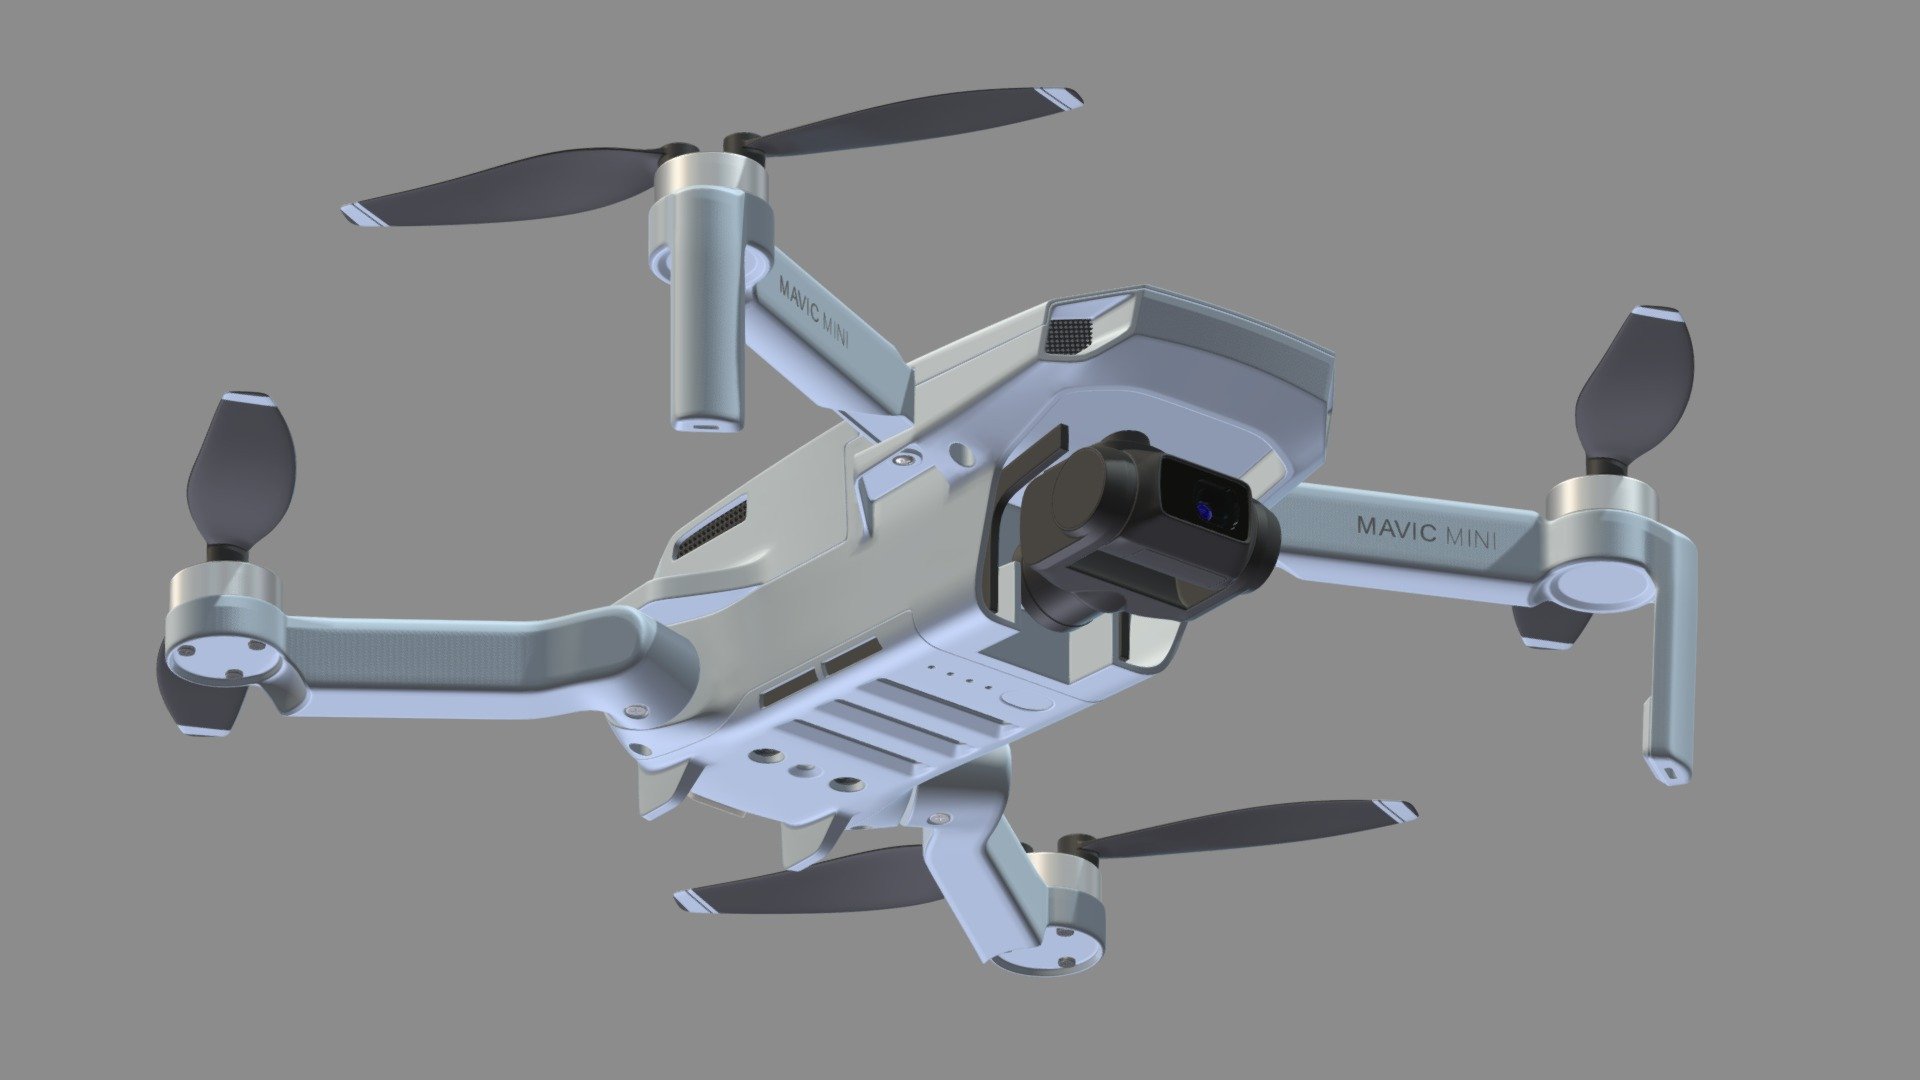 Hi, I'm Frezzy. I am leader of Cgivn studio. We are finished over 3000 projects since 2013.
If you want hire me to do 3d model please touch me at:cgivn.studio Thanks you! - DJI Mavic Mini - Buy Royalty Free 3D model by Frezzy3D 3d model